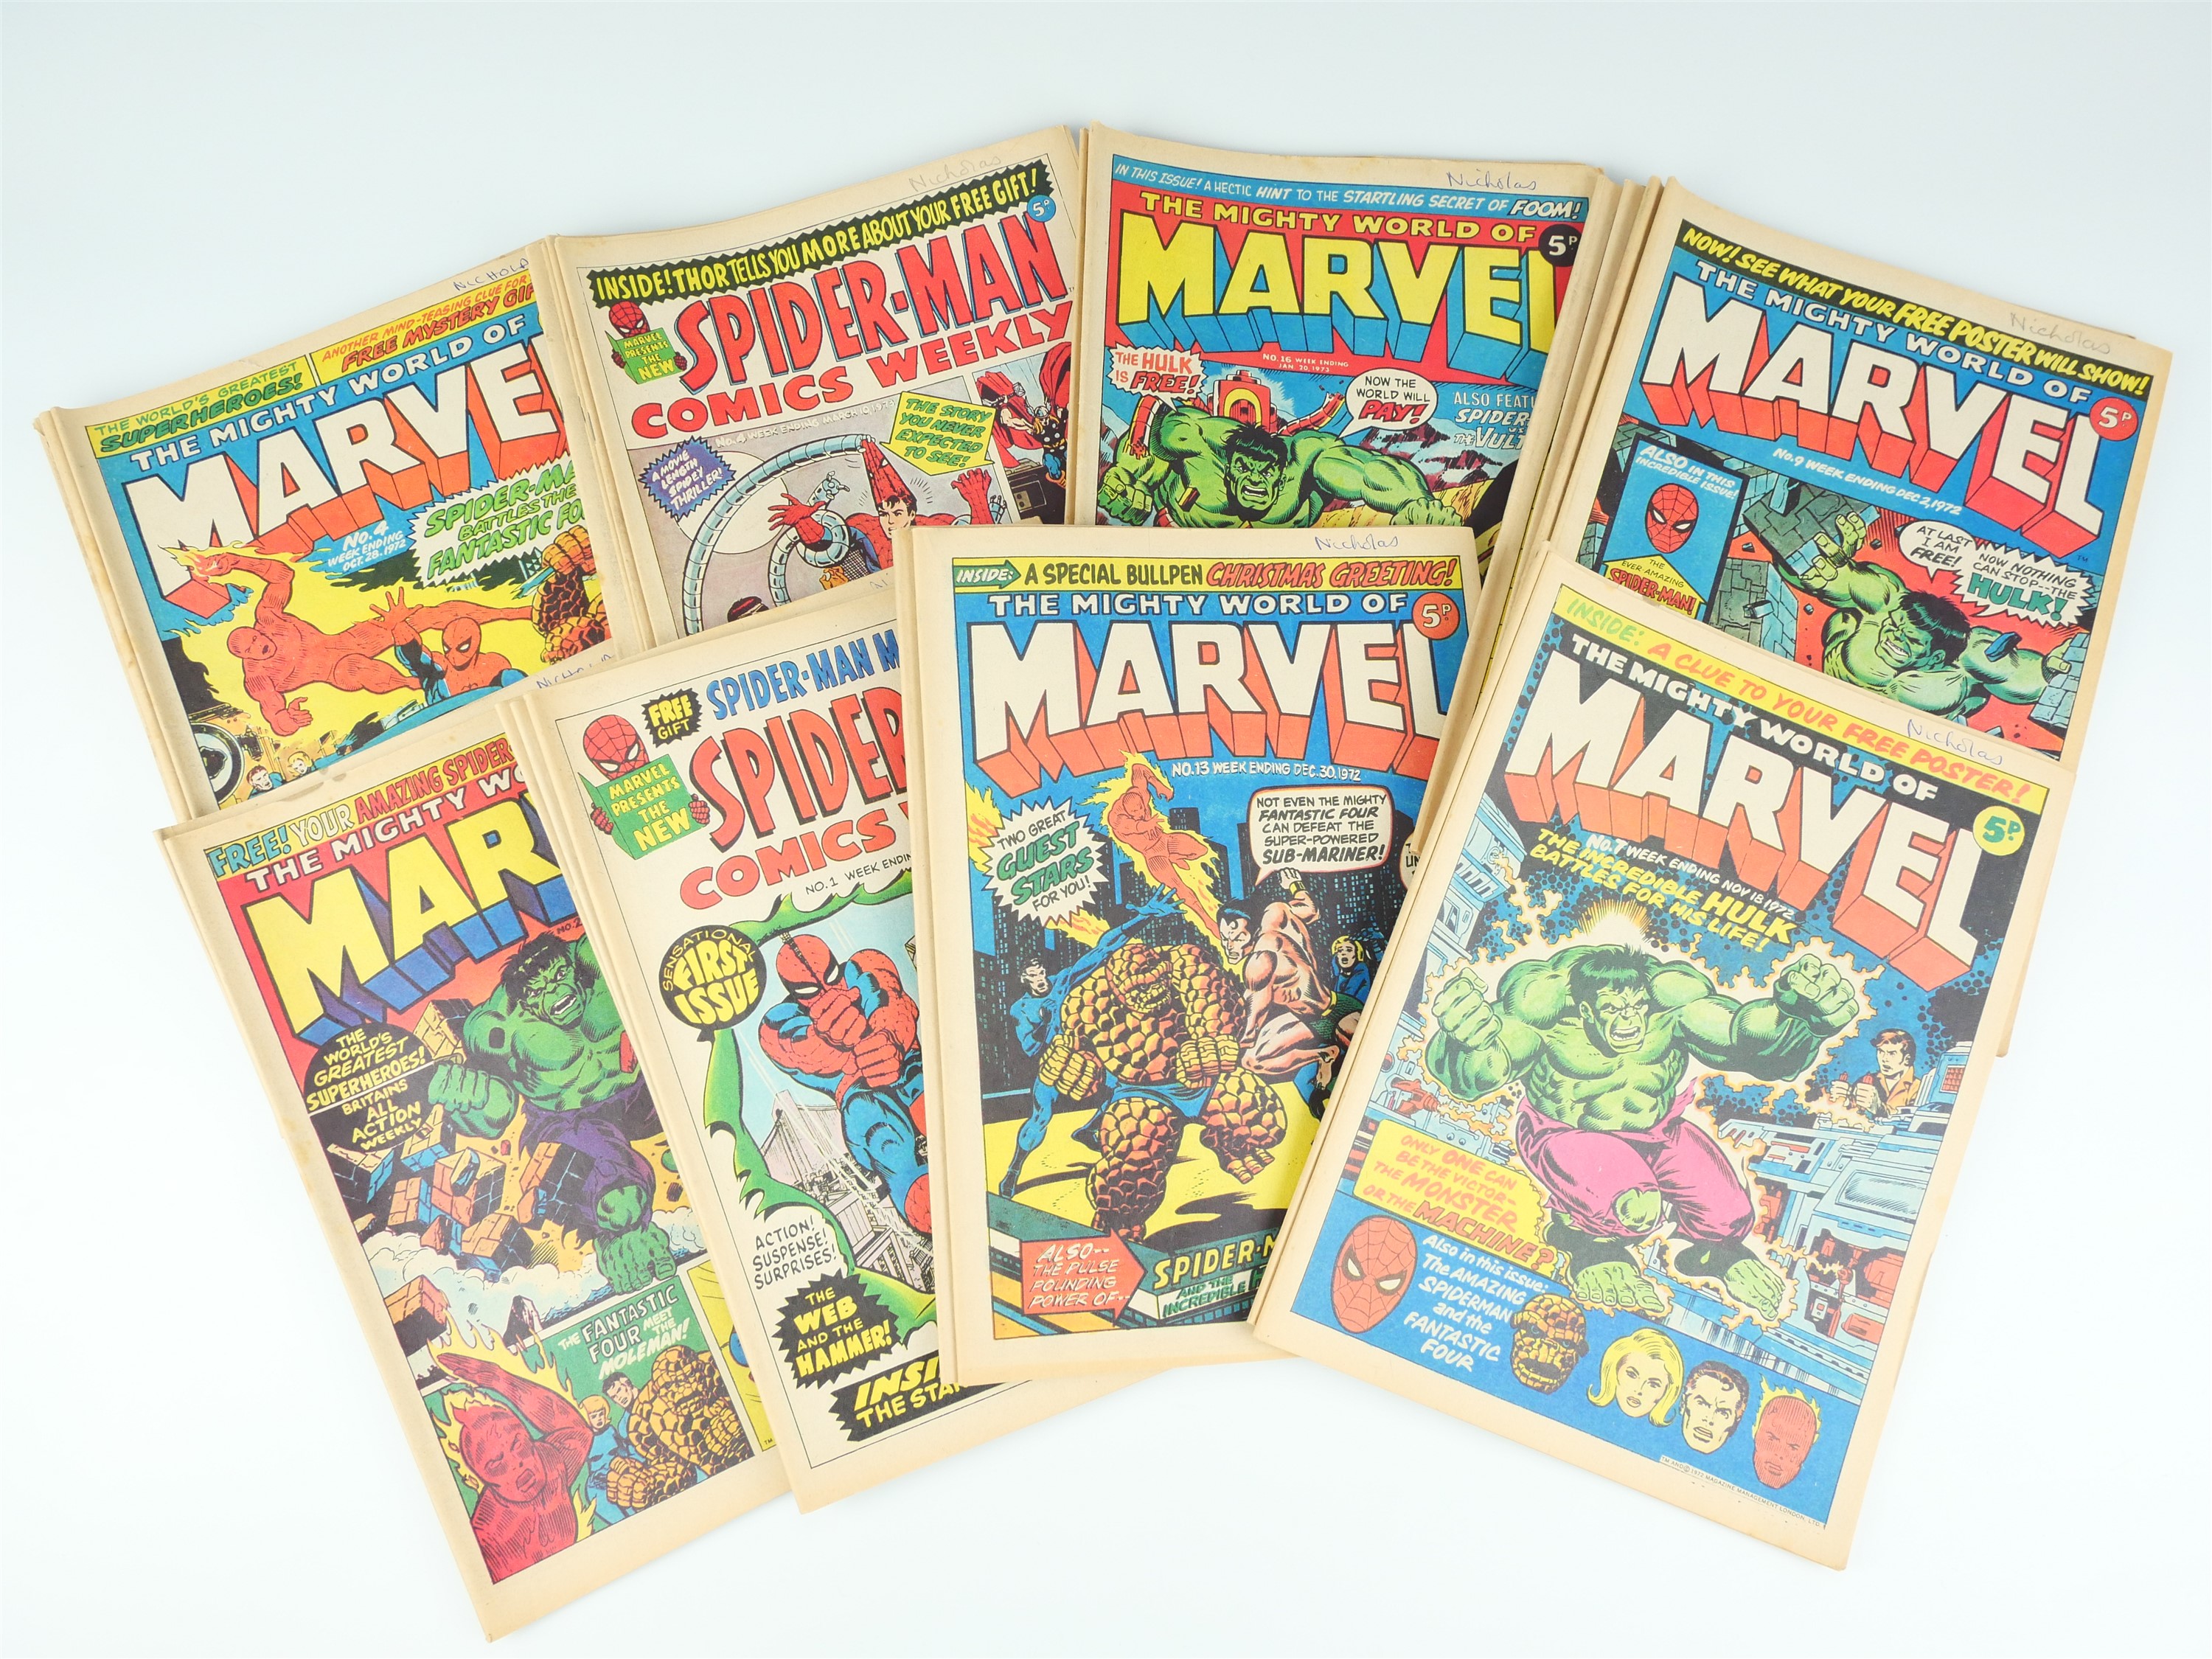 The Mighty World of Marvel, editions 1-19, 7th October to 10th February 1973 together with Spiderman - Image 2 of 4